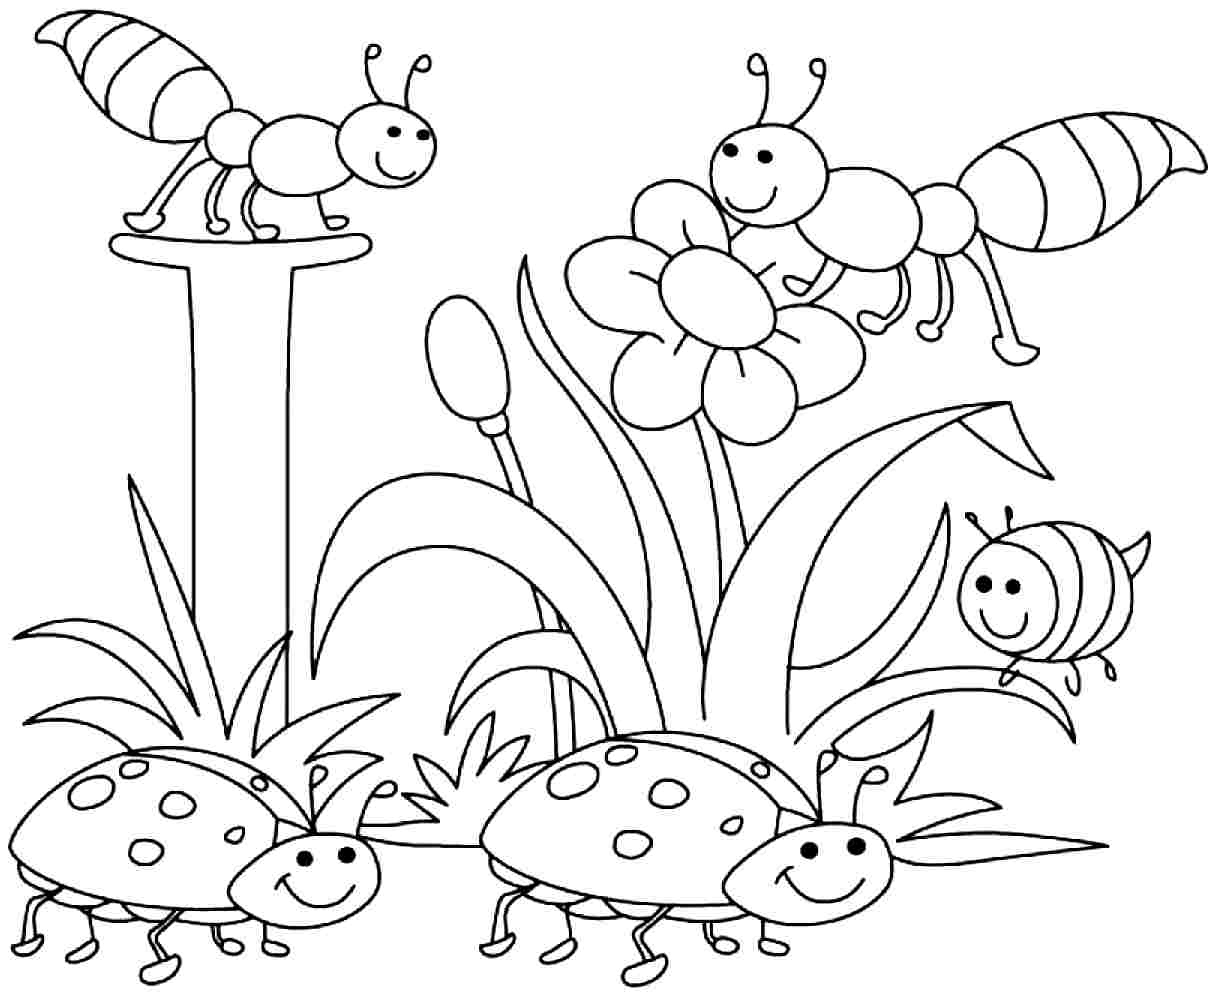 coloring-pages-for-toddlers-preschool-and-kindergarten-at-getdrawings-free-download